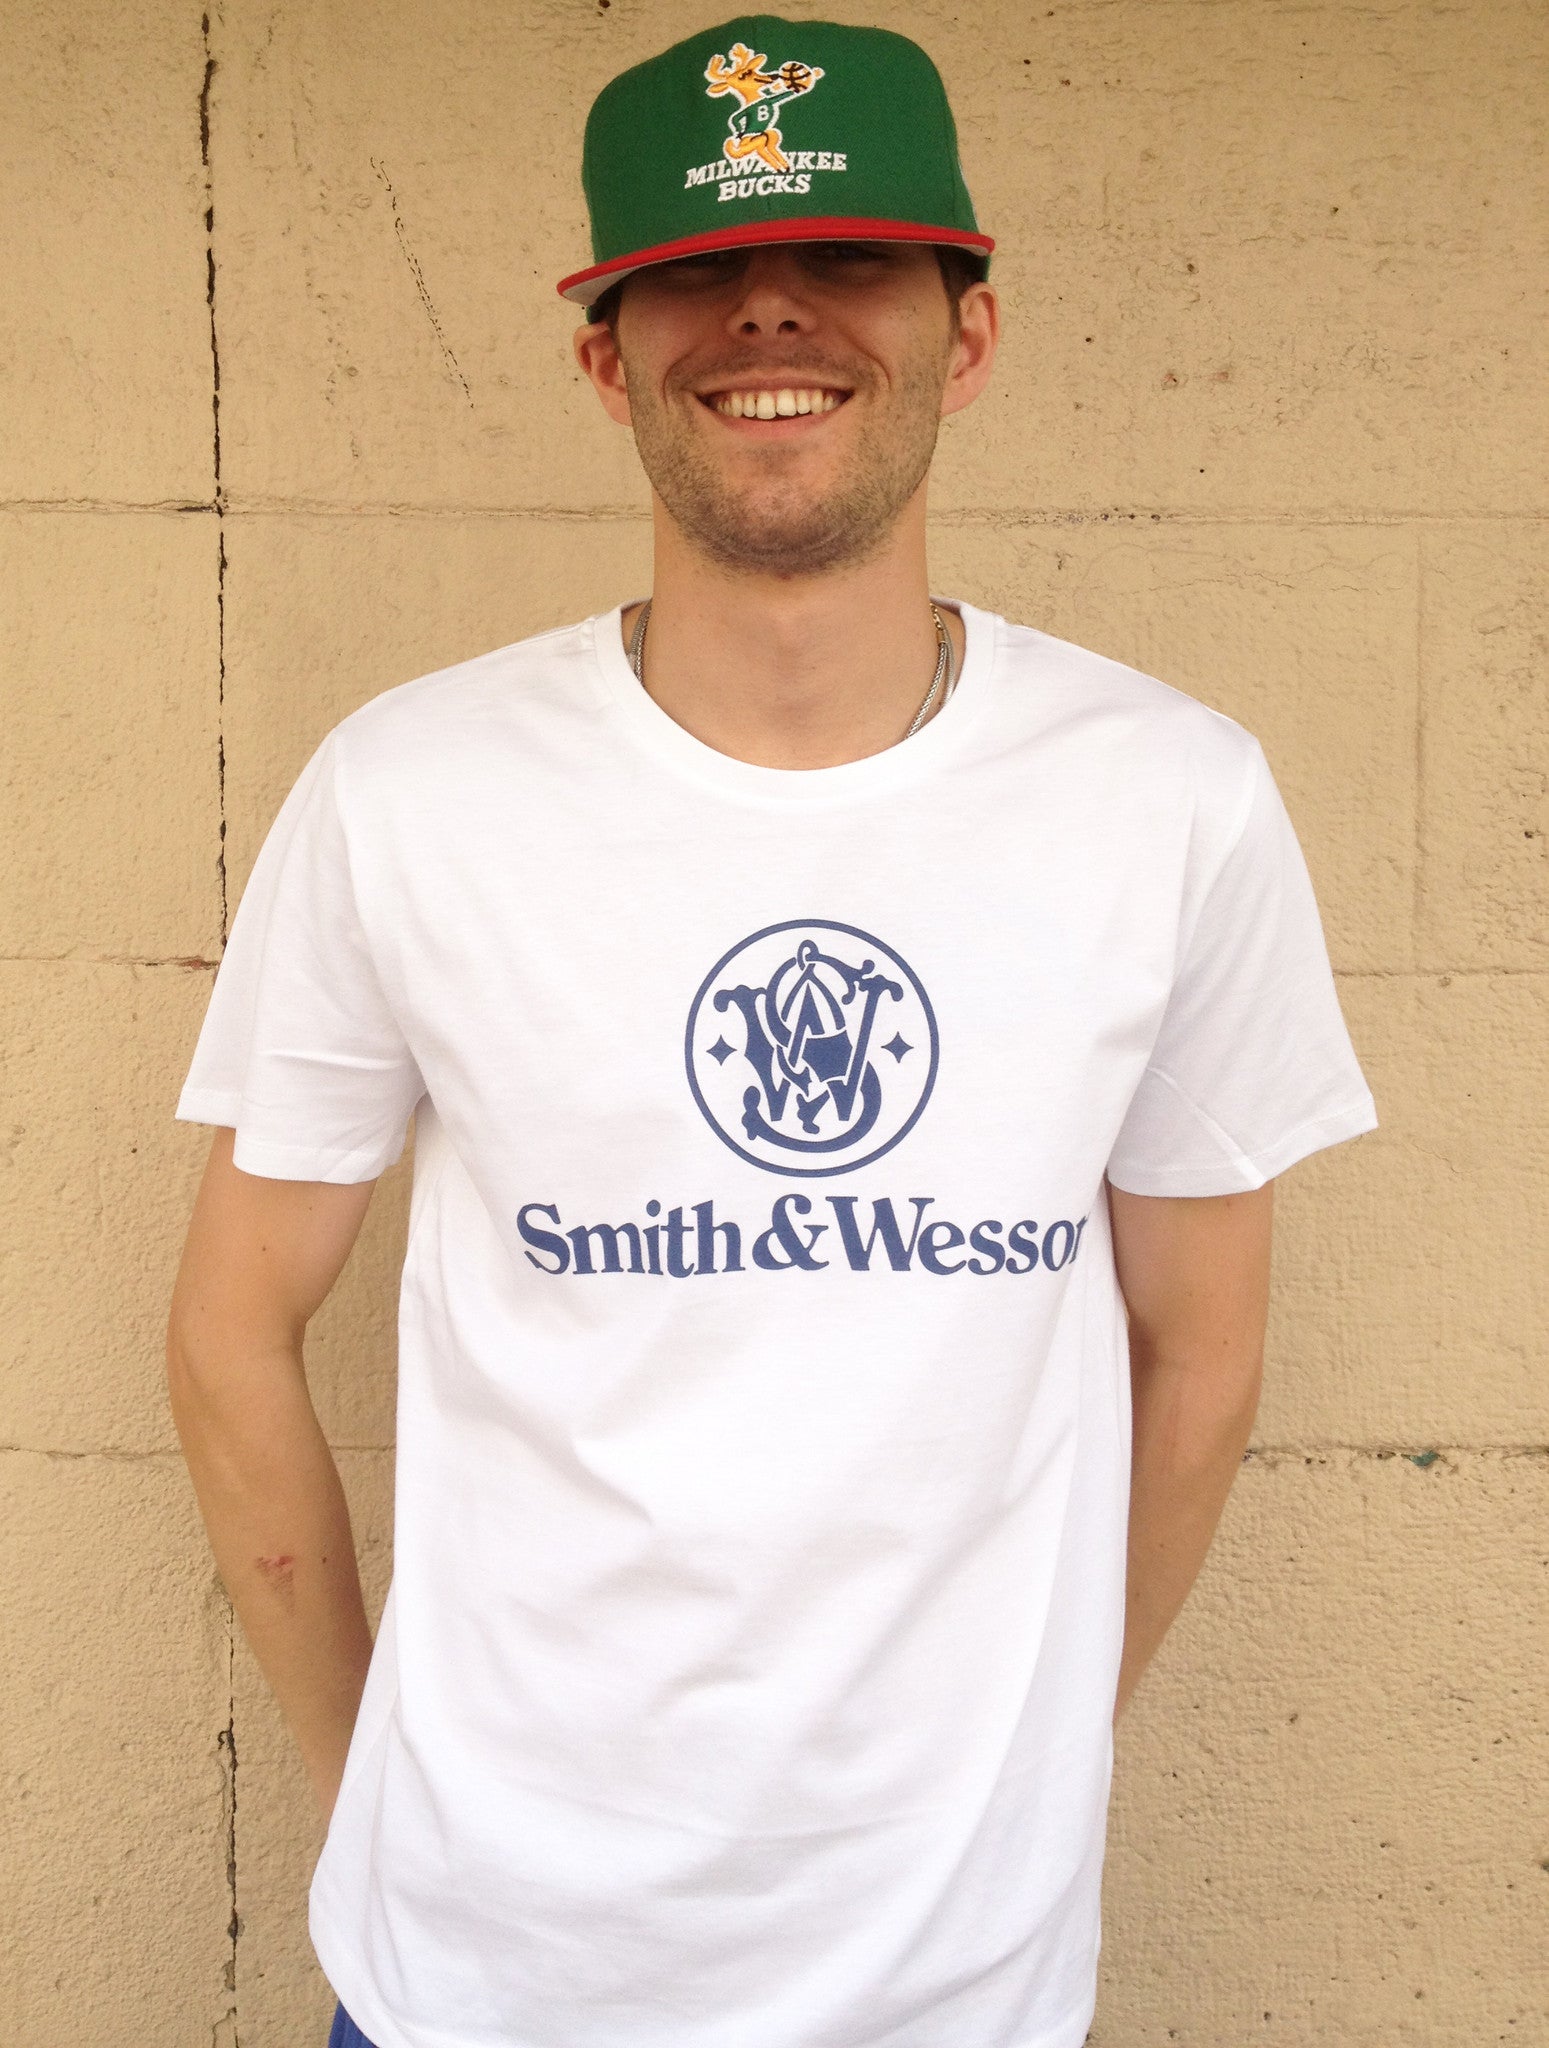 Smith & Wesson-T shirt-Atelier Amelot